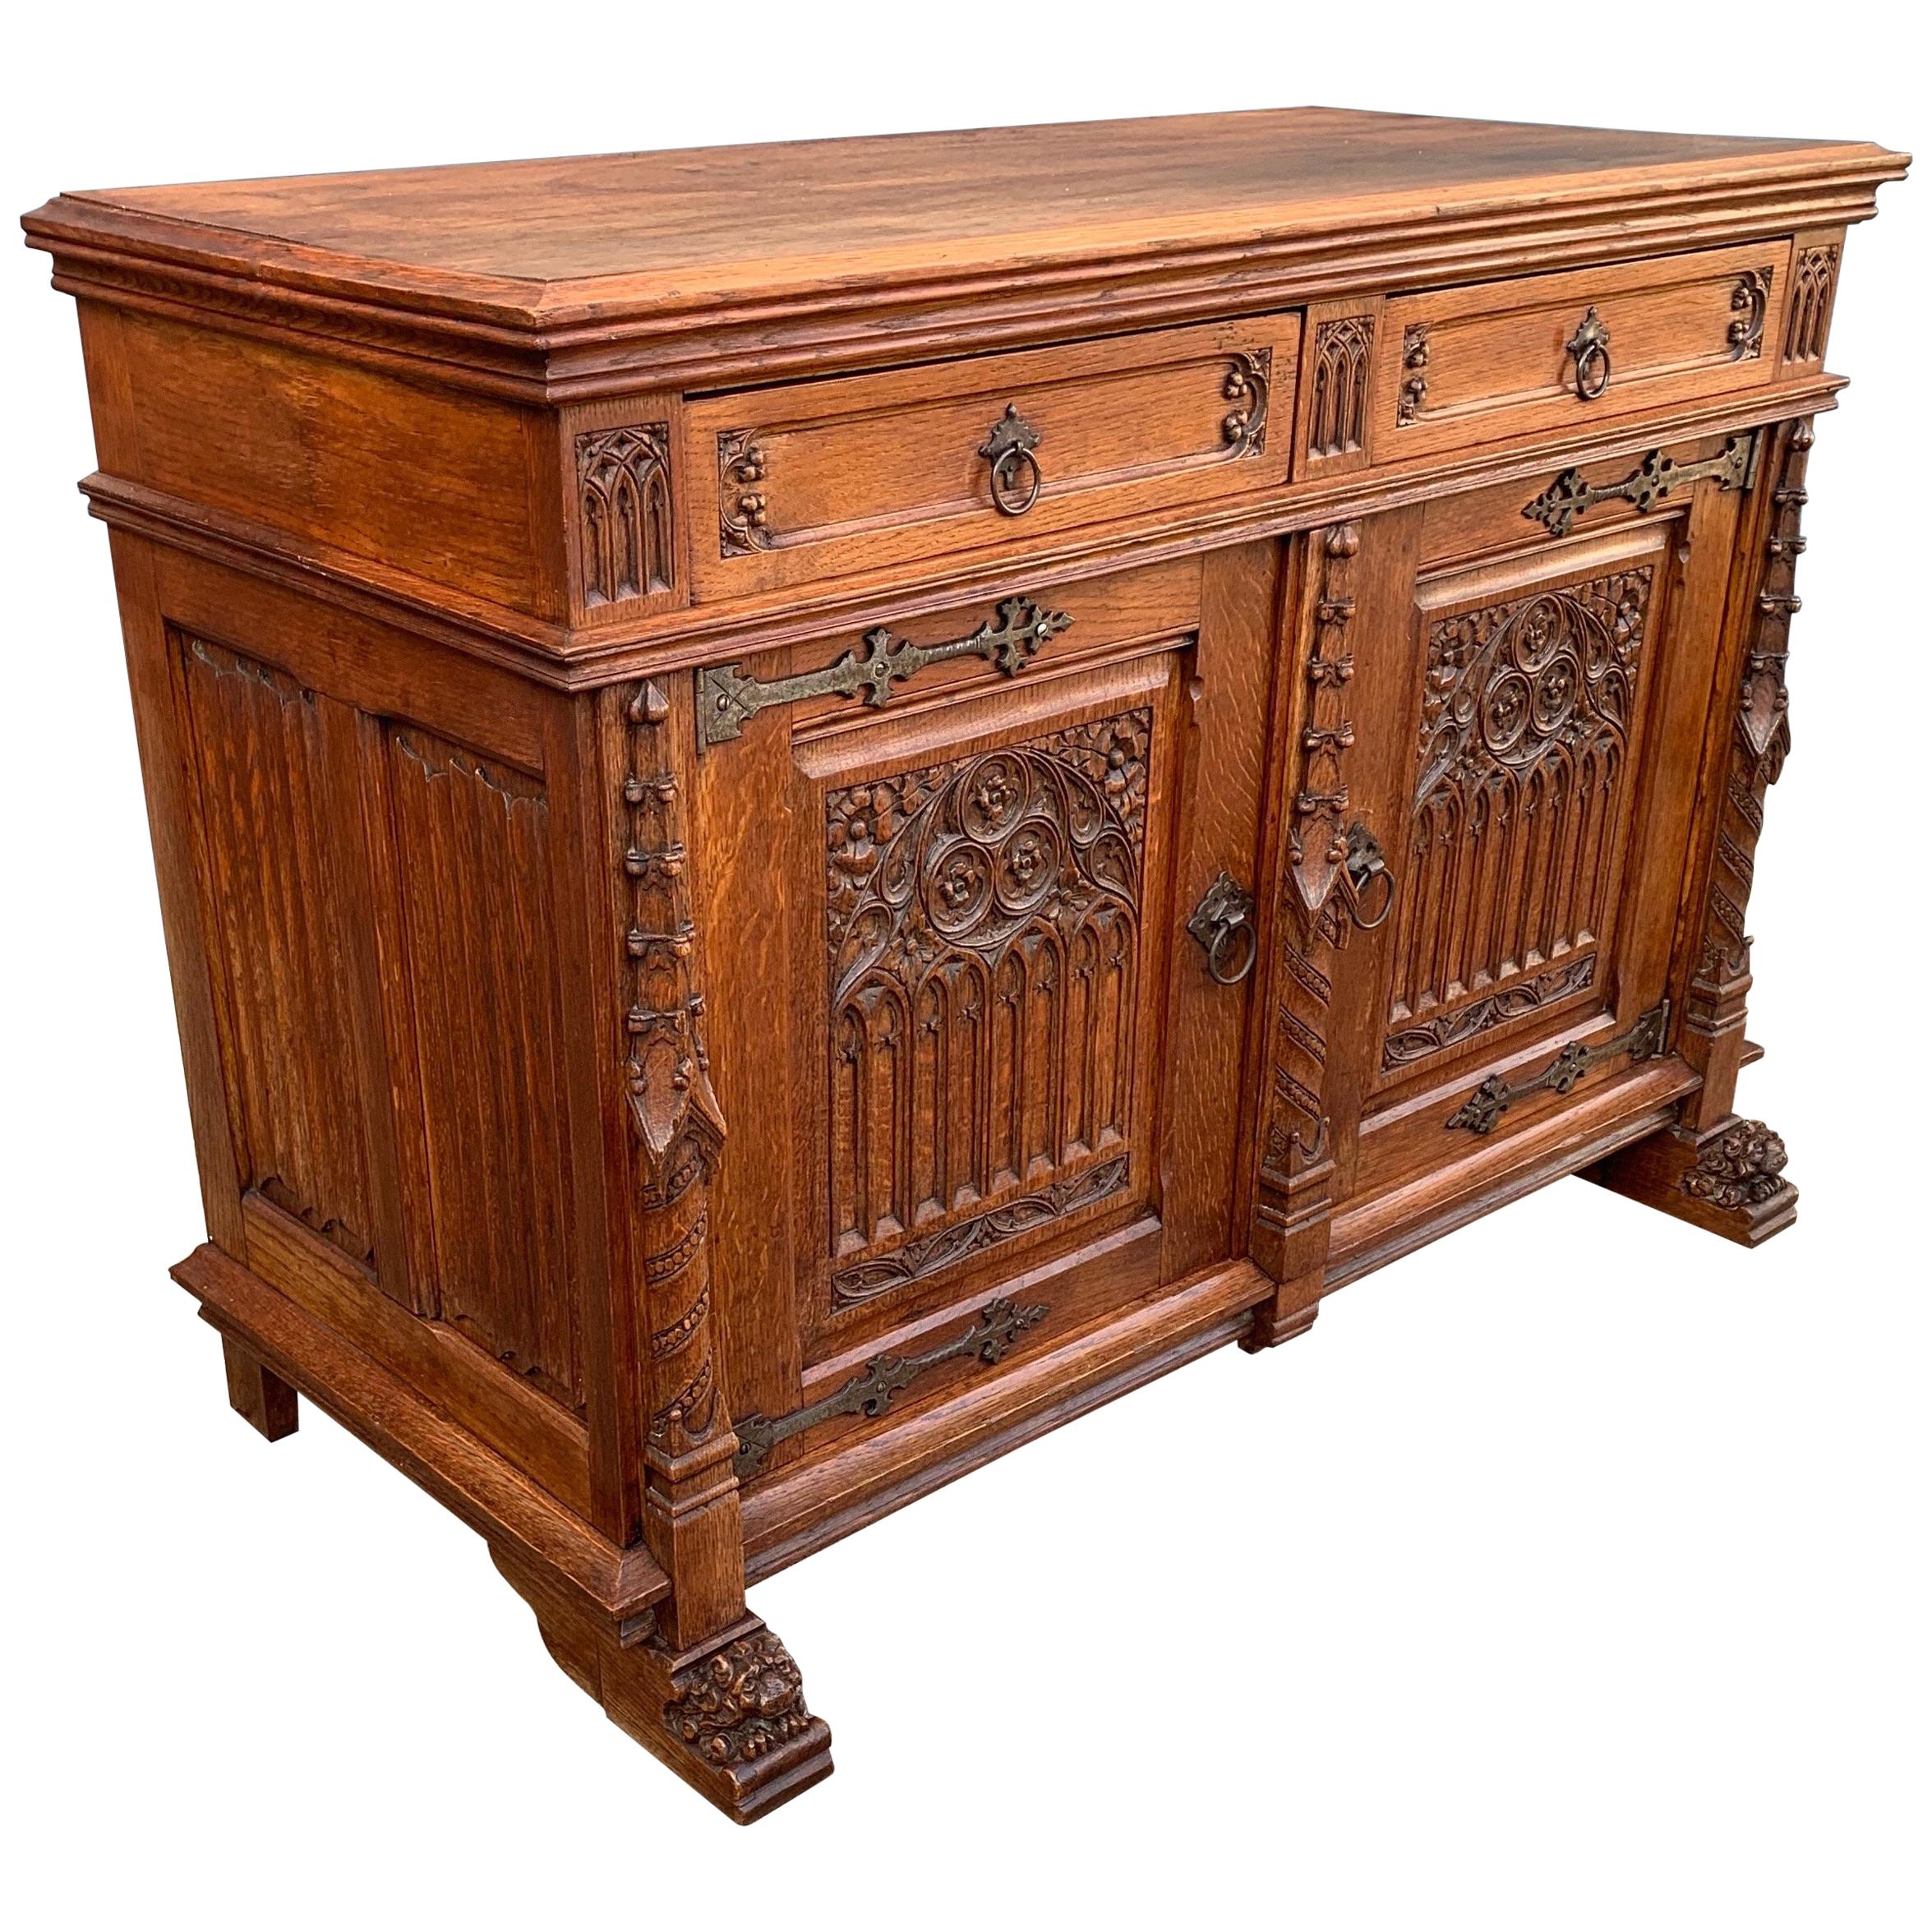 Stunning Gothic Revival Cabinet / Small Credenza with Hand Carved Church Windows